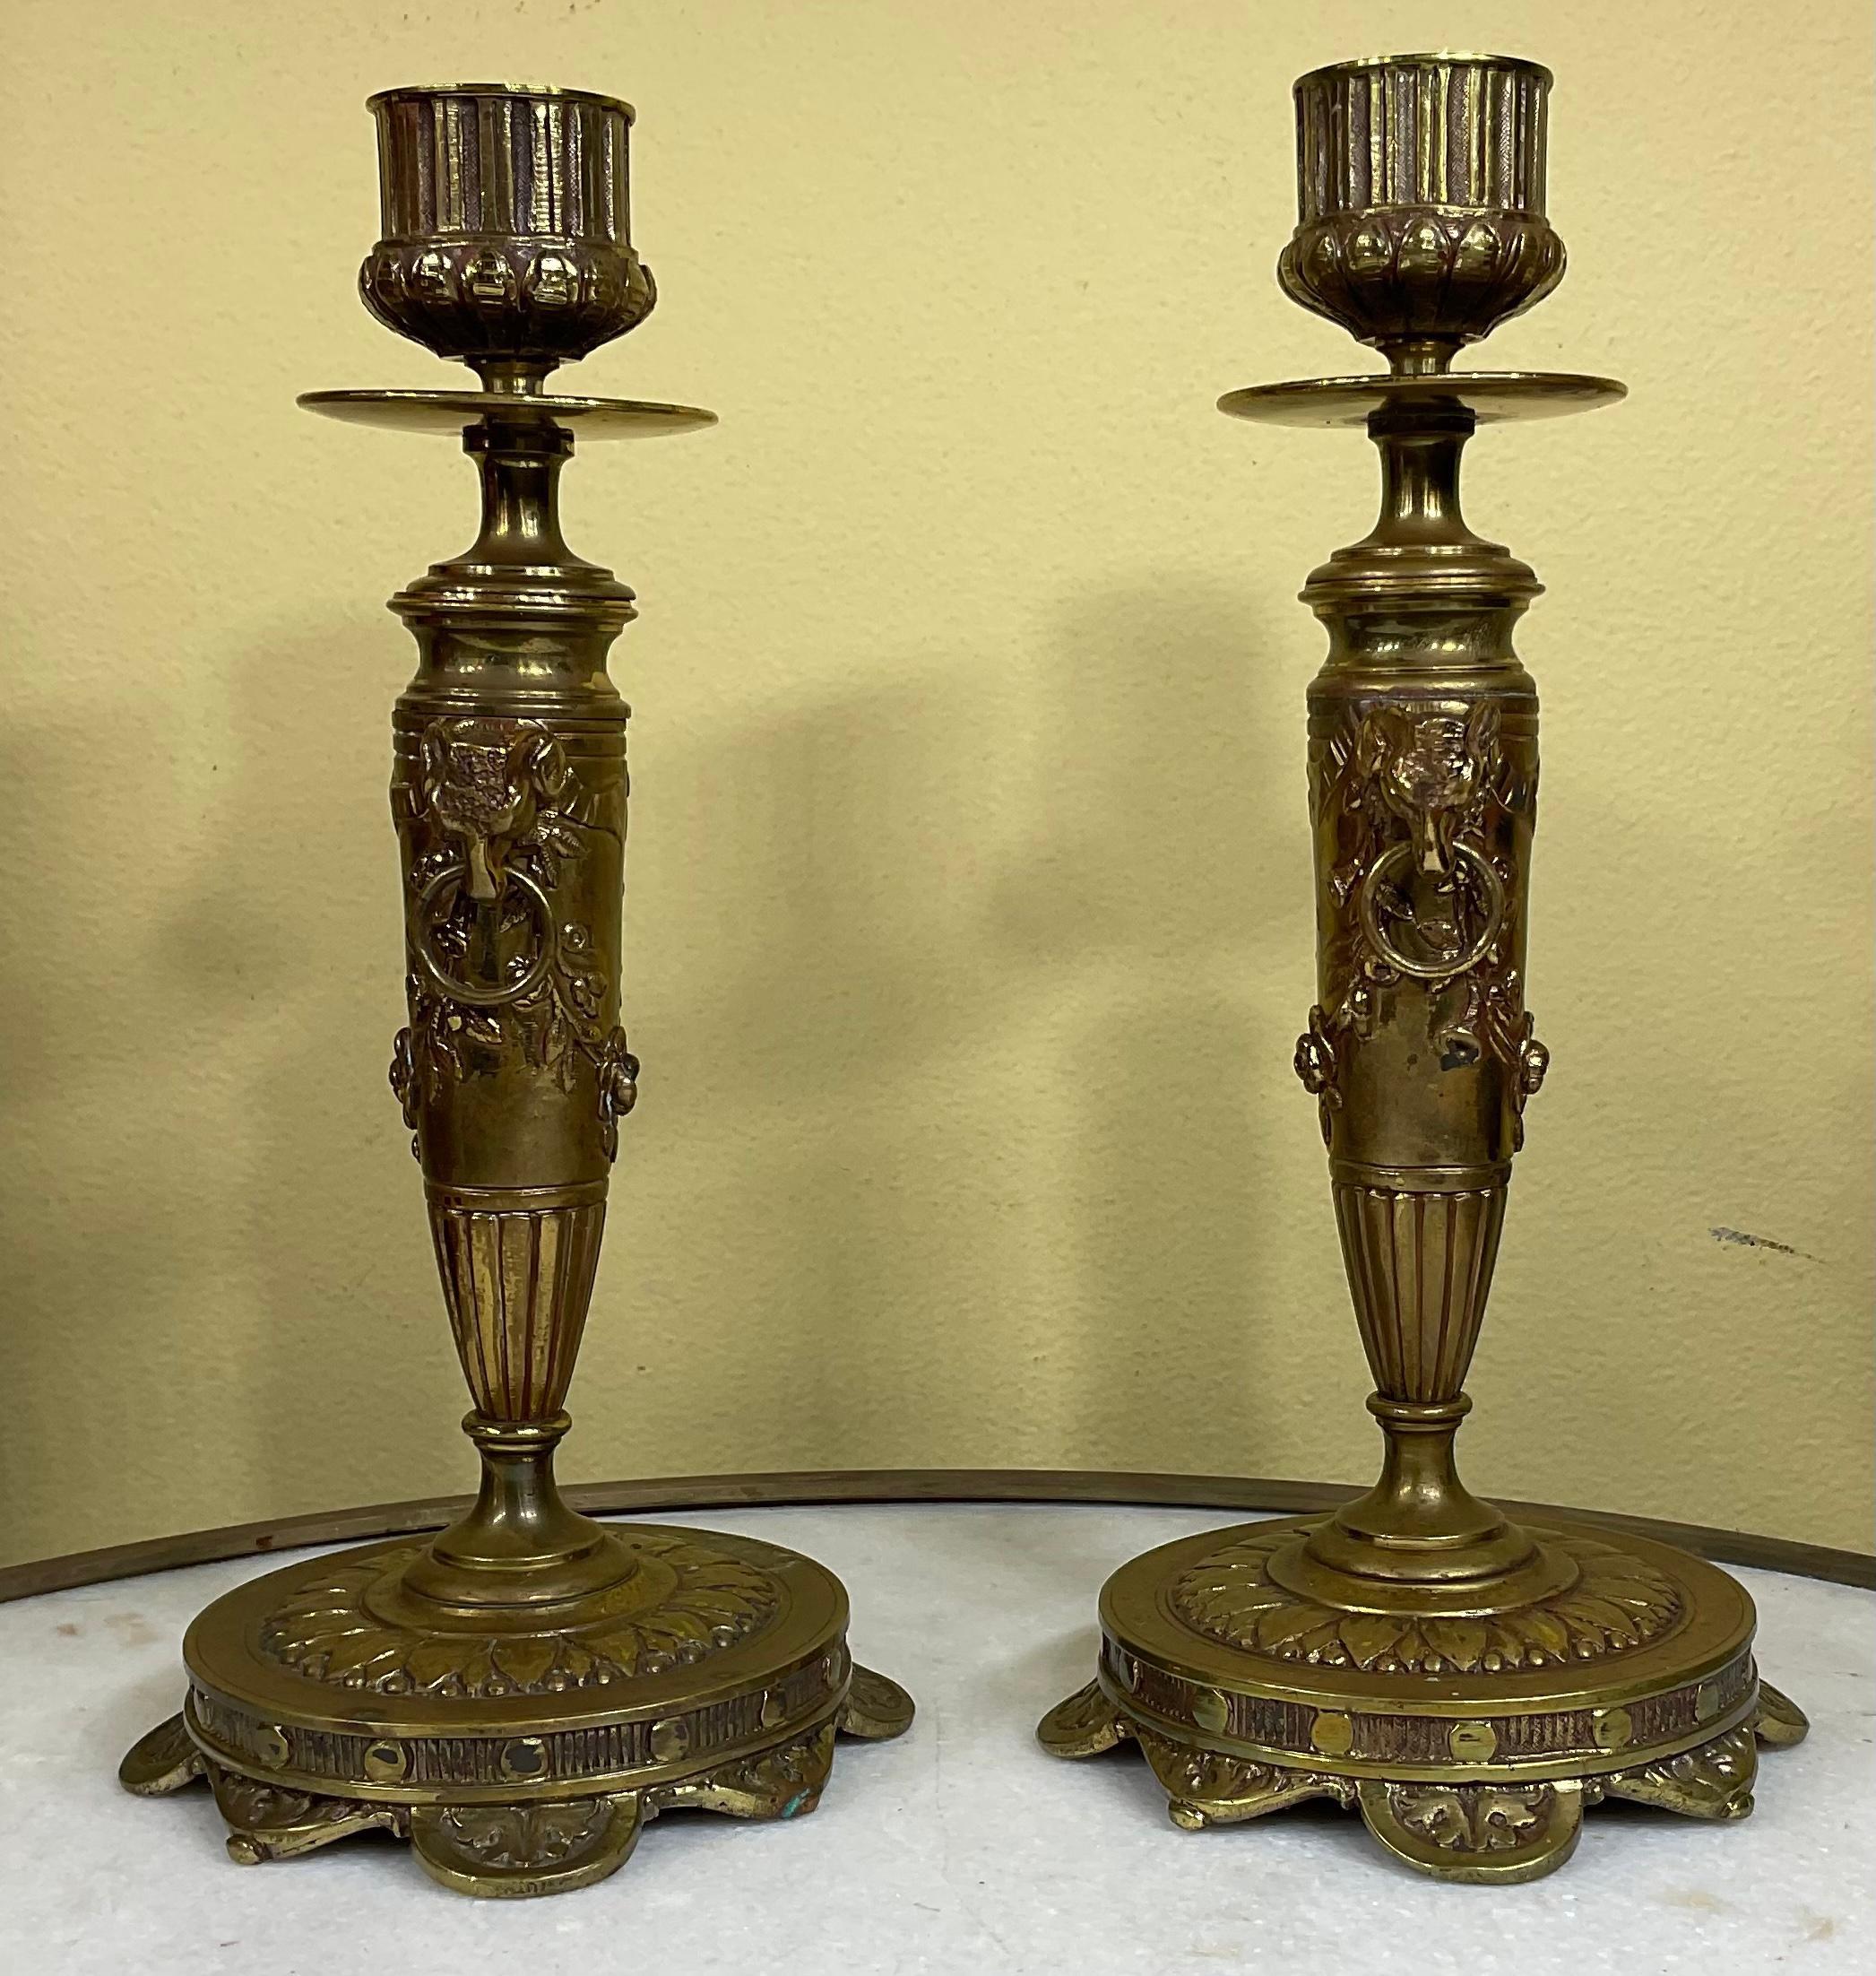 An unusual pair of French engraved low candlesticks with and delicately incised and decorated base , the middle has two rams head , and floral motif. original silvering under the base.
Excellent object of art for display.
 